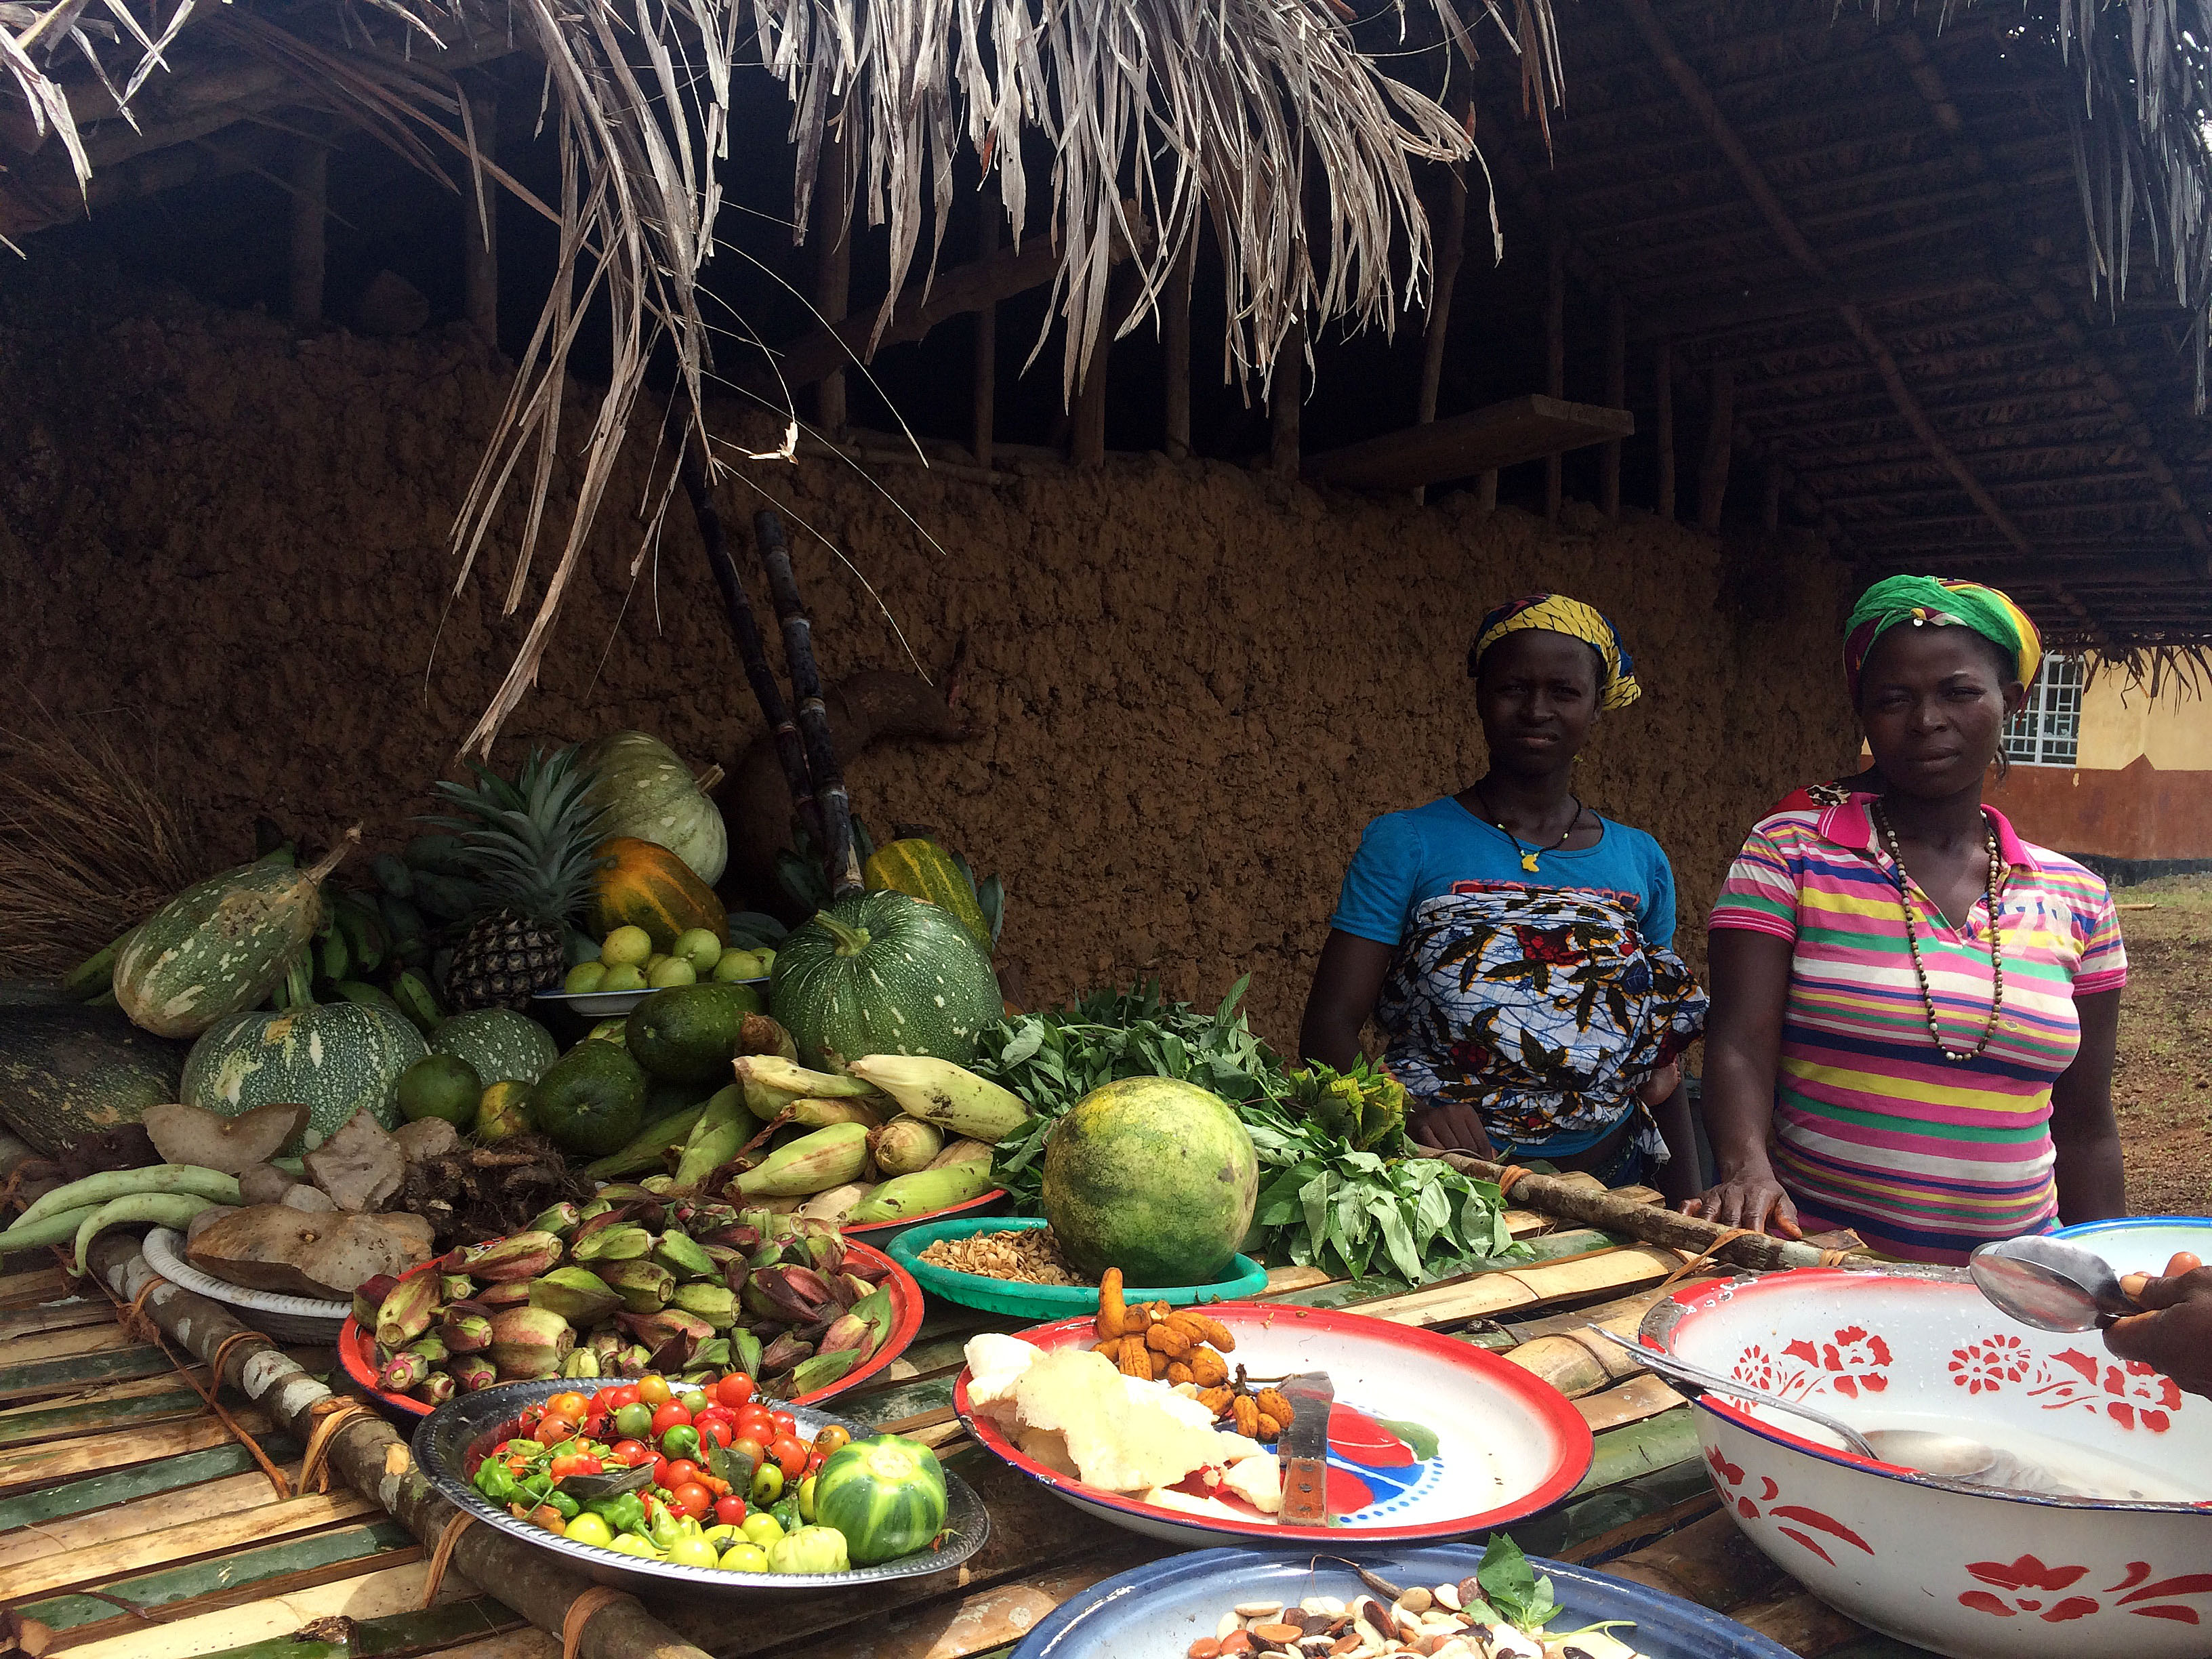 A community women’s group presents produce that they grew in their community garden, supported by a local NGO.